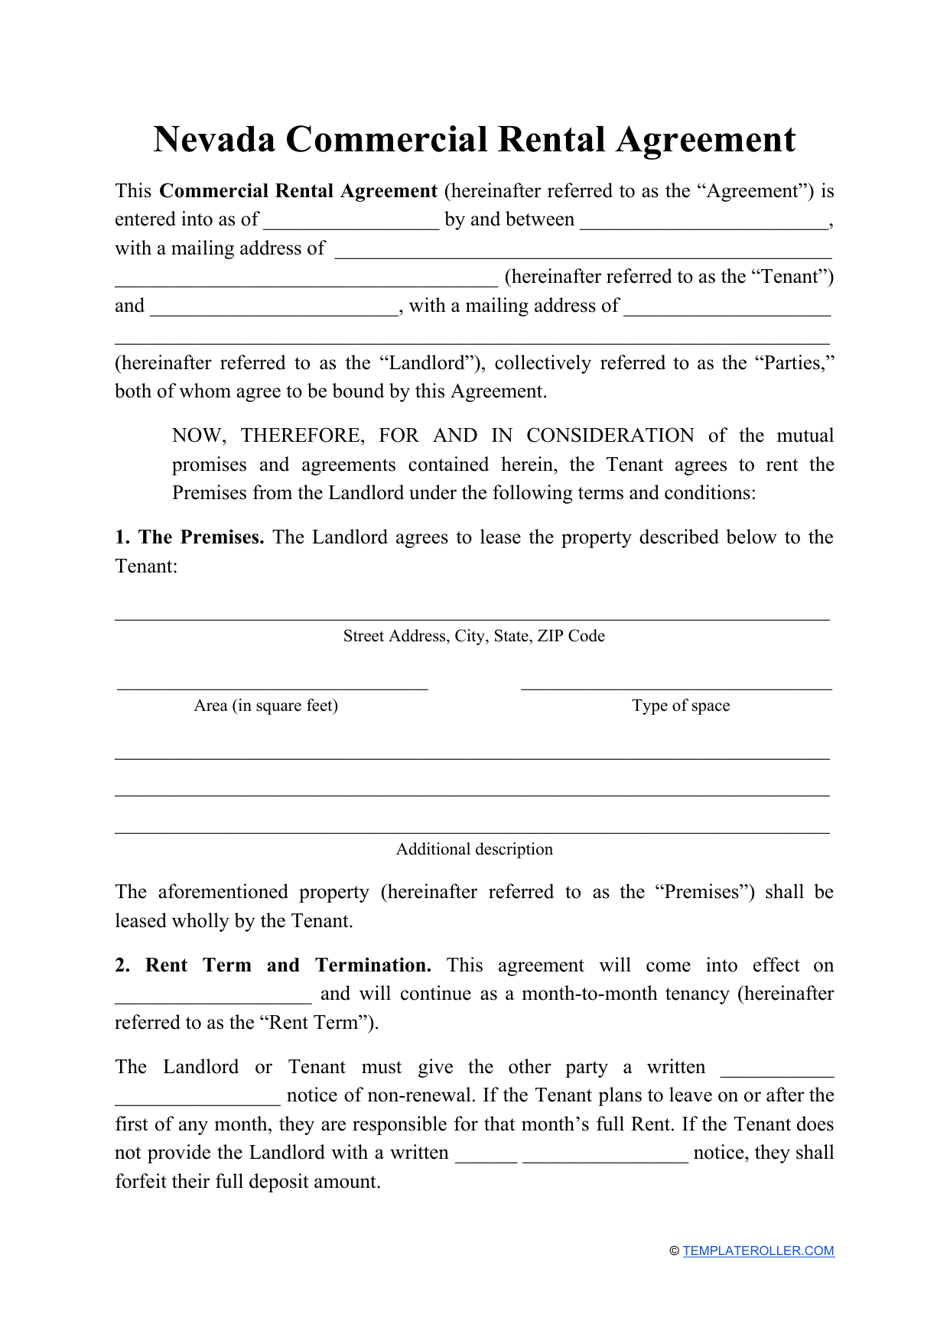 Commercial Rental Agreement Template - Nevada, Page 1